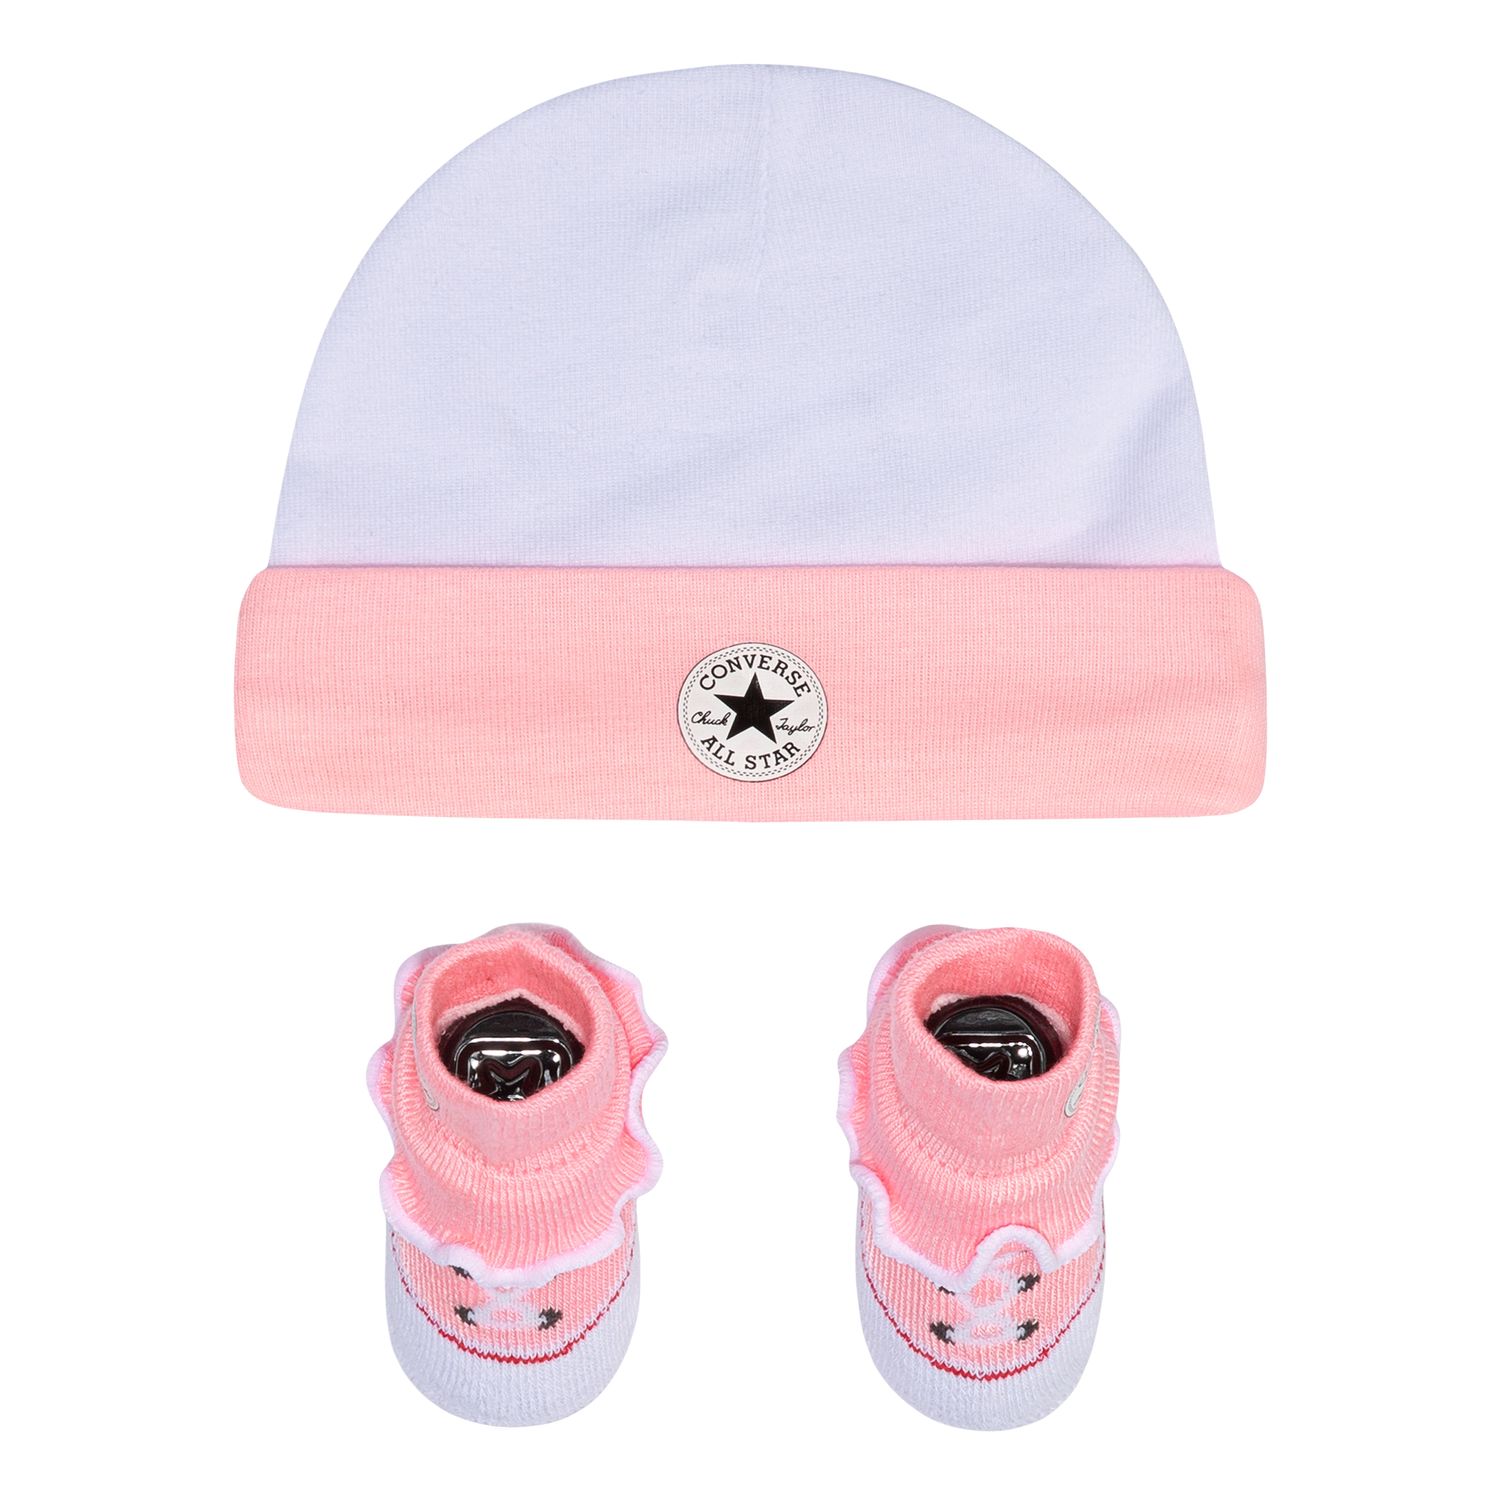 converse baby hat and socks set